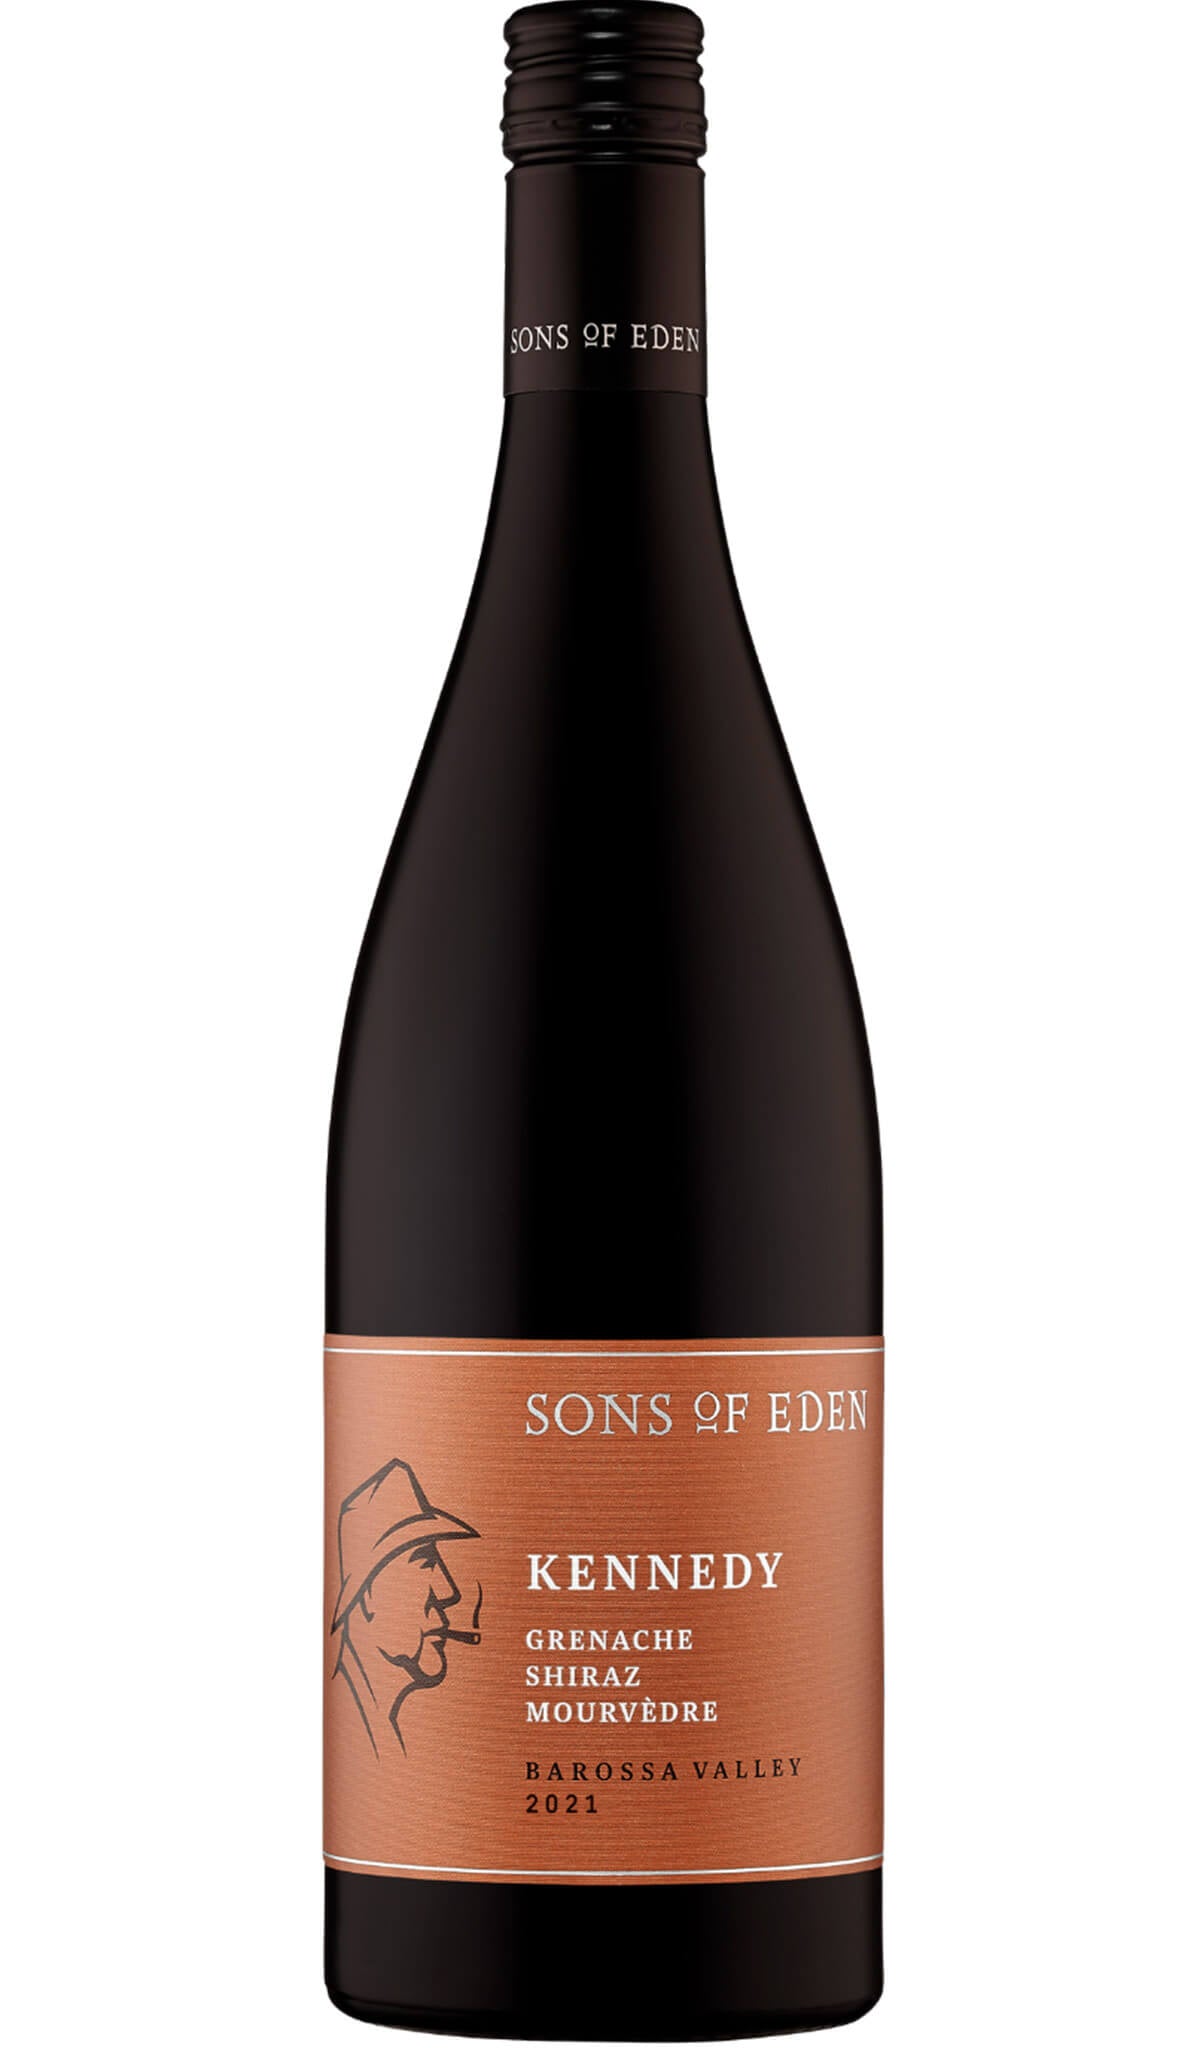 Find out more or buy Sons Of Eden Kennedy GSM 2021 (Barossa Valley) online at Wine Sellers Direct - Australia’s independent liquor specialists.